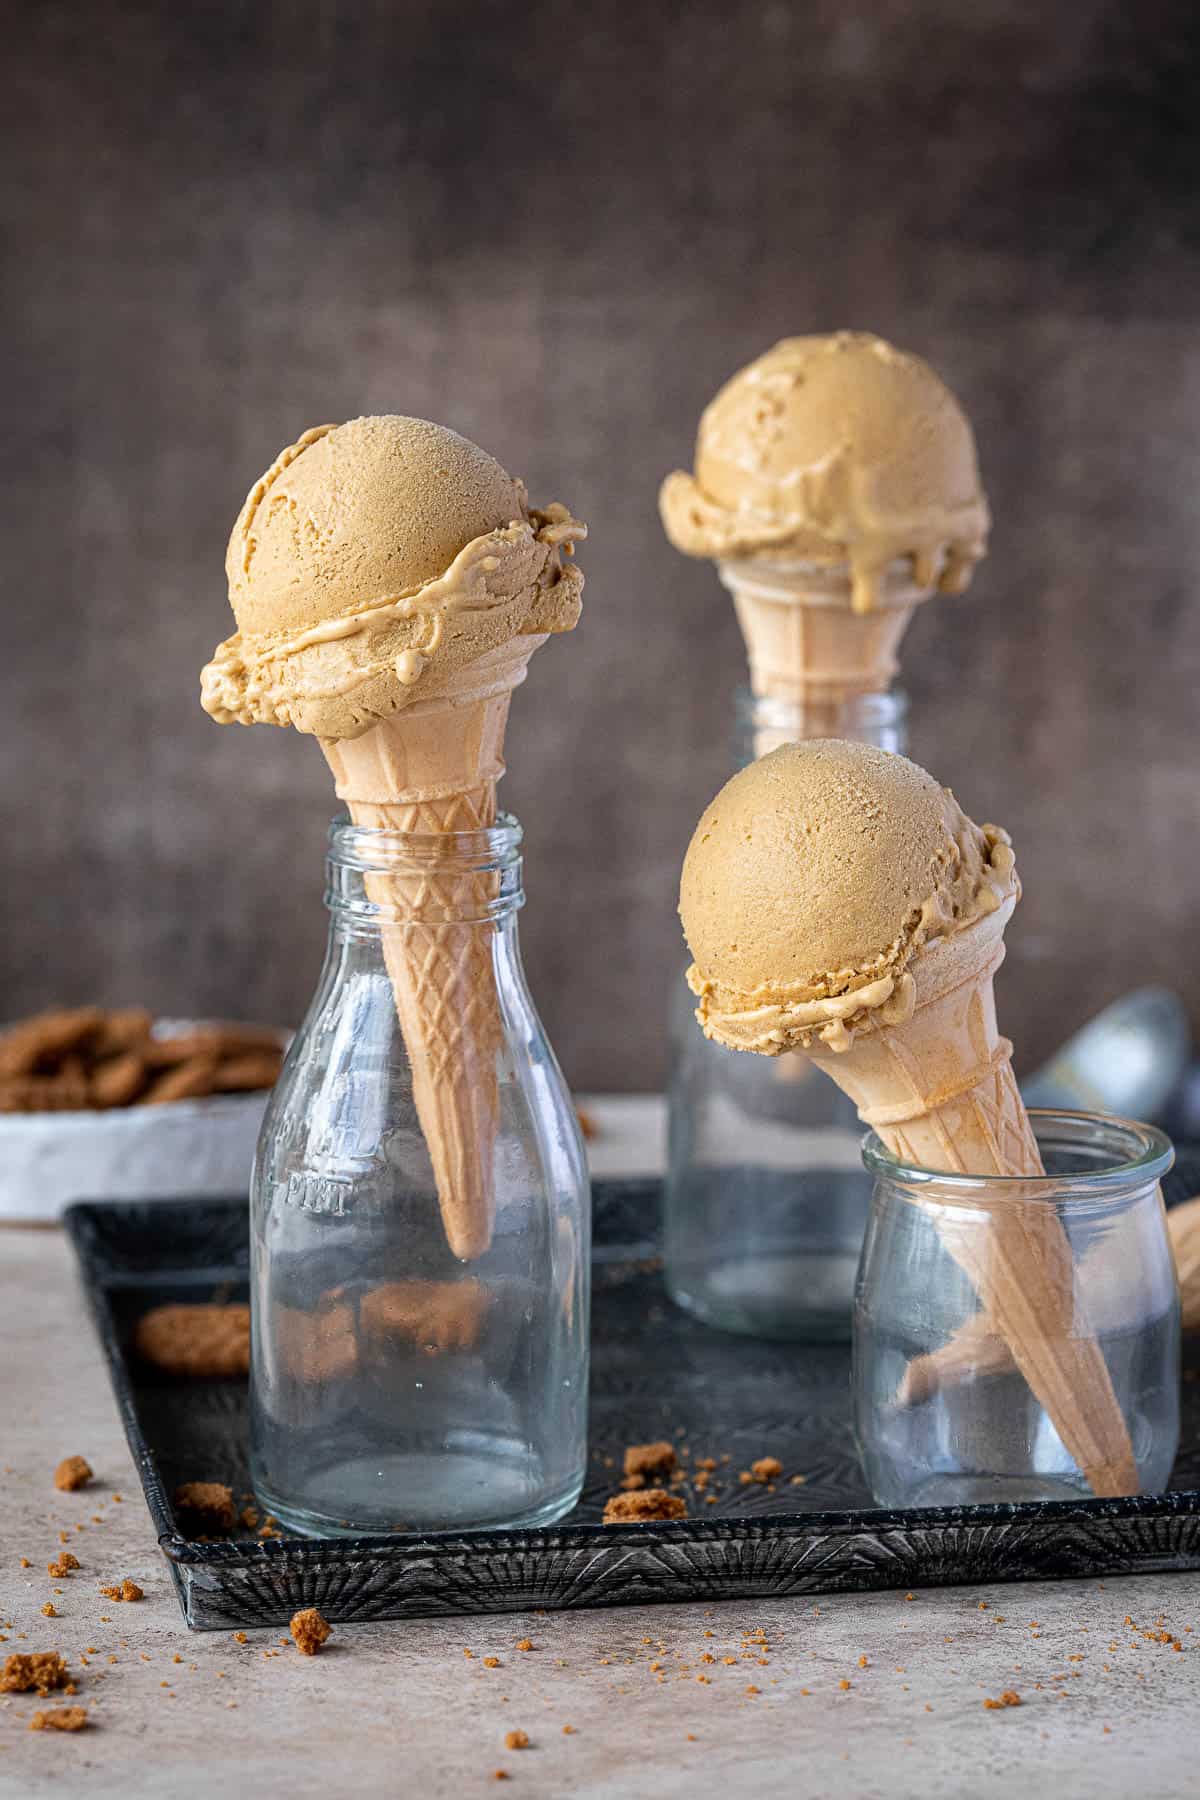 Three cones of vegan pumpkin ice cream in glass milk bottles with a bowl of crushed cookies.